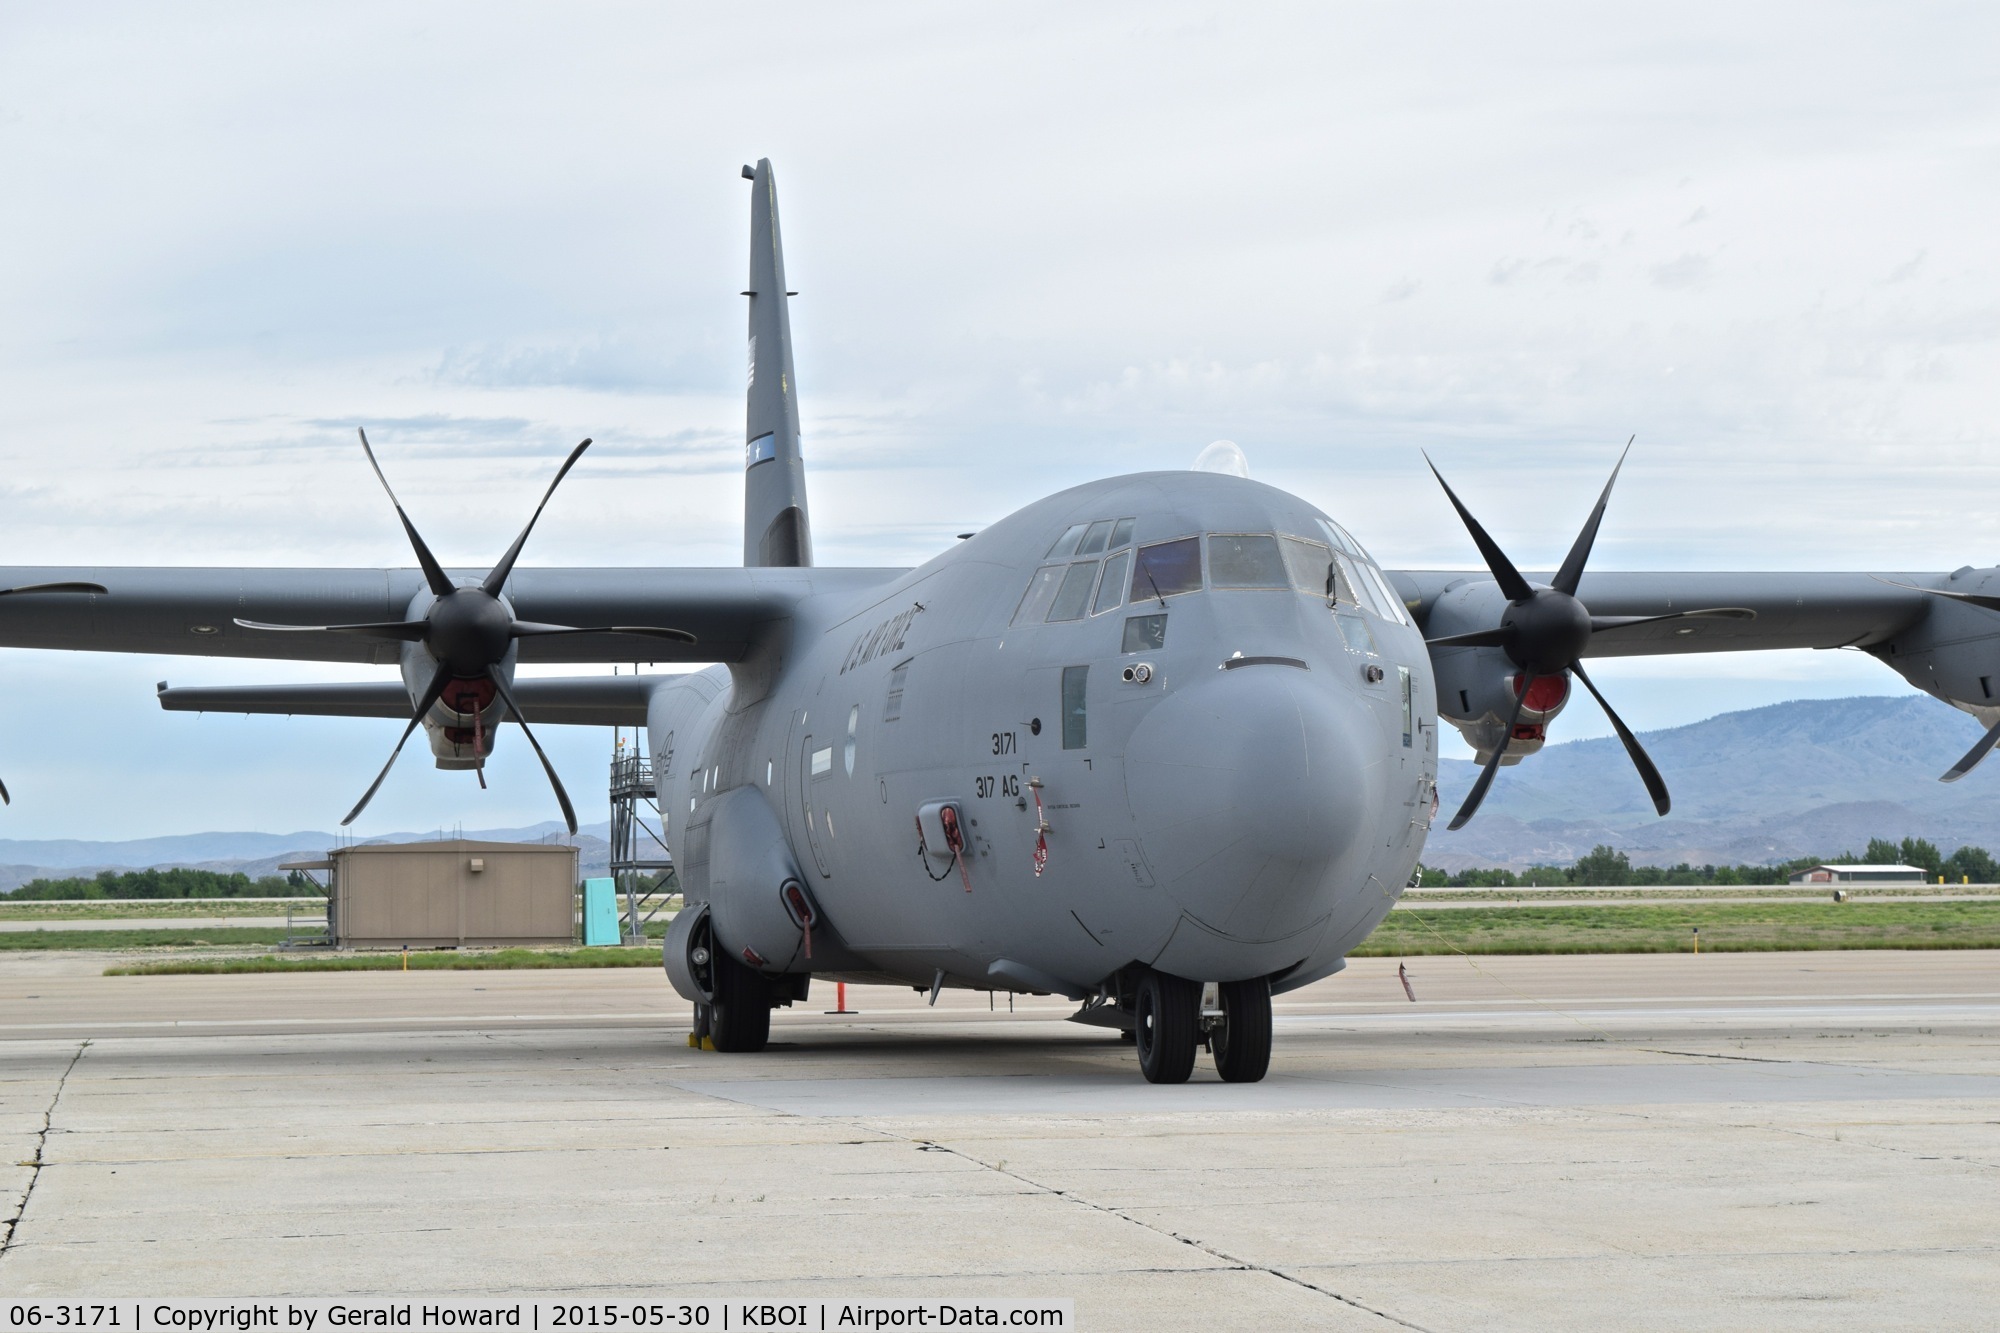 06-3171, 2010 Lockheed Martin C-130J-30 Super Hercules C/N 382-5641, Parked on south GS ramp.  317th Airlift Group, Dyess AFB, TX.